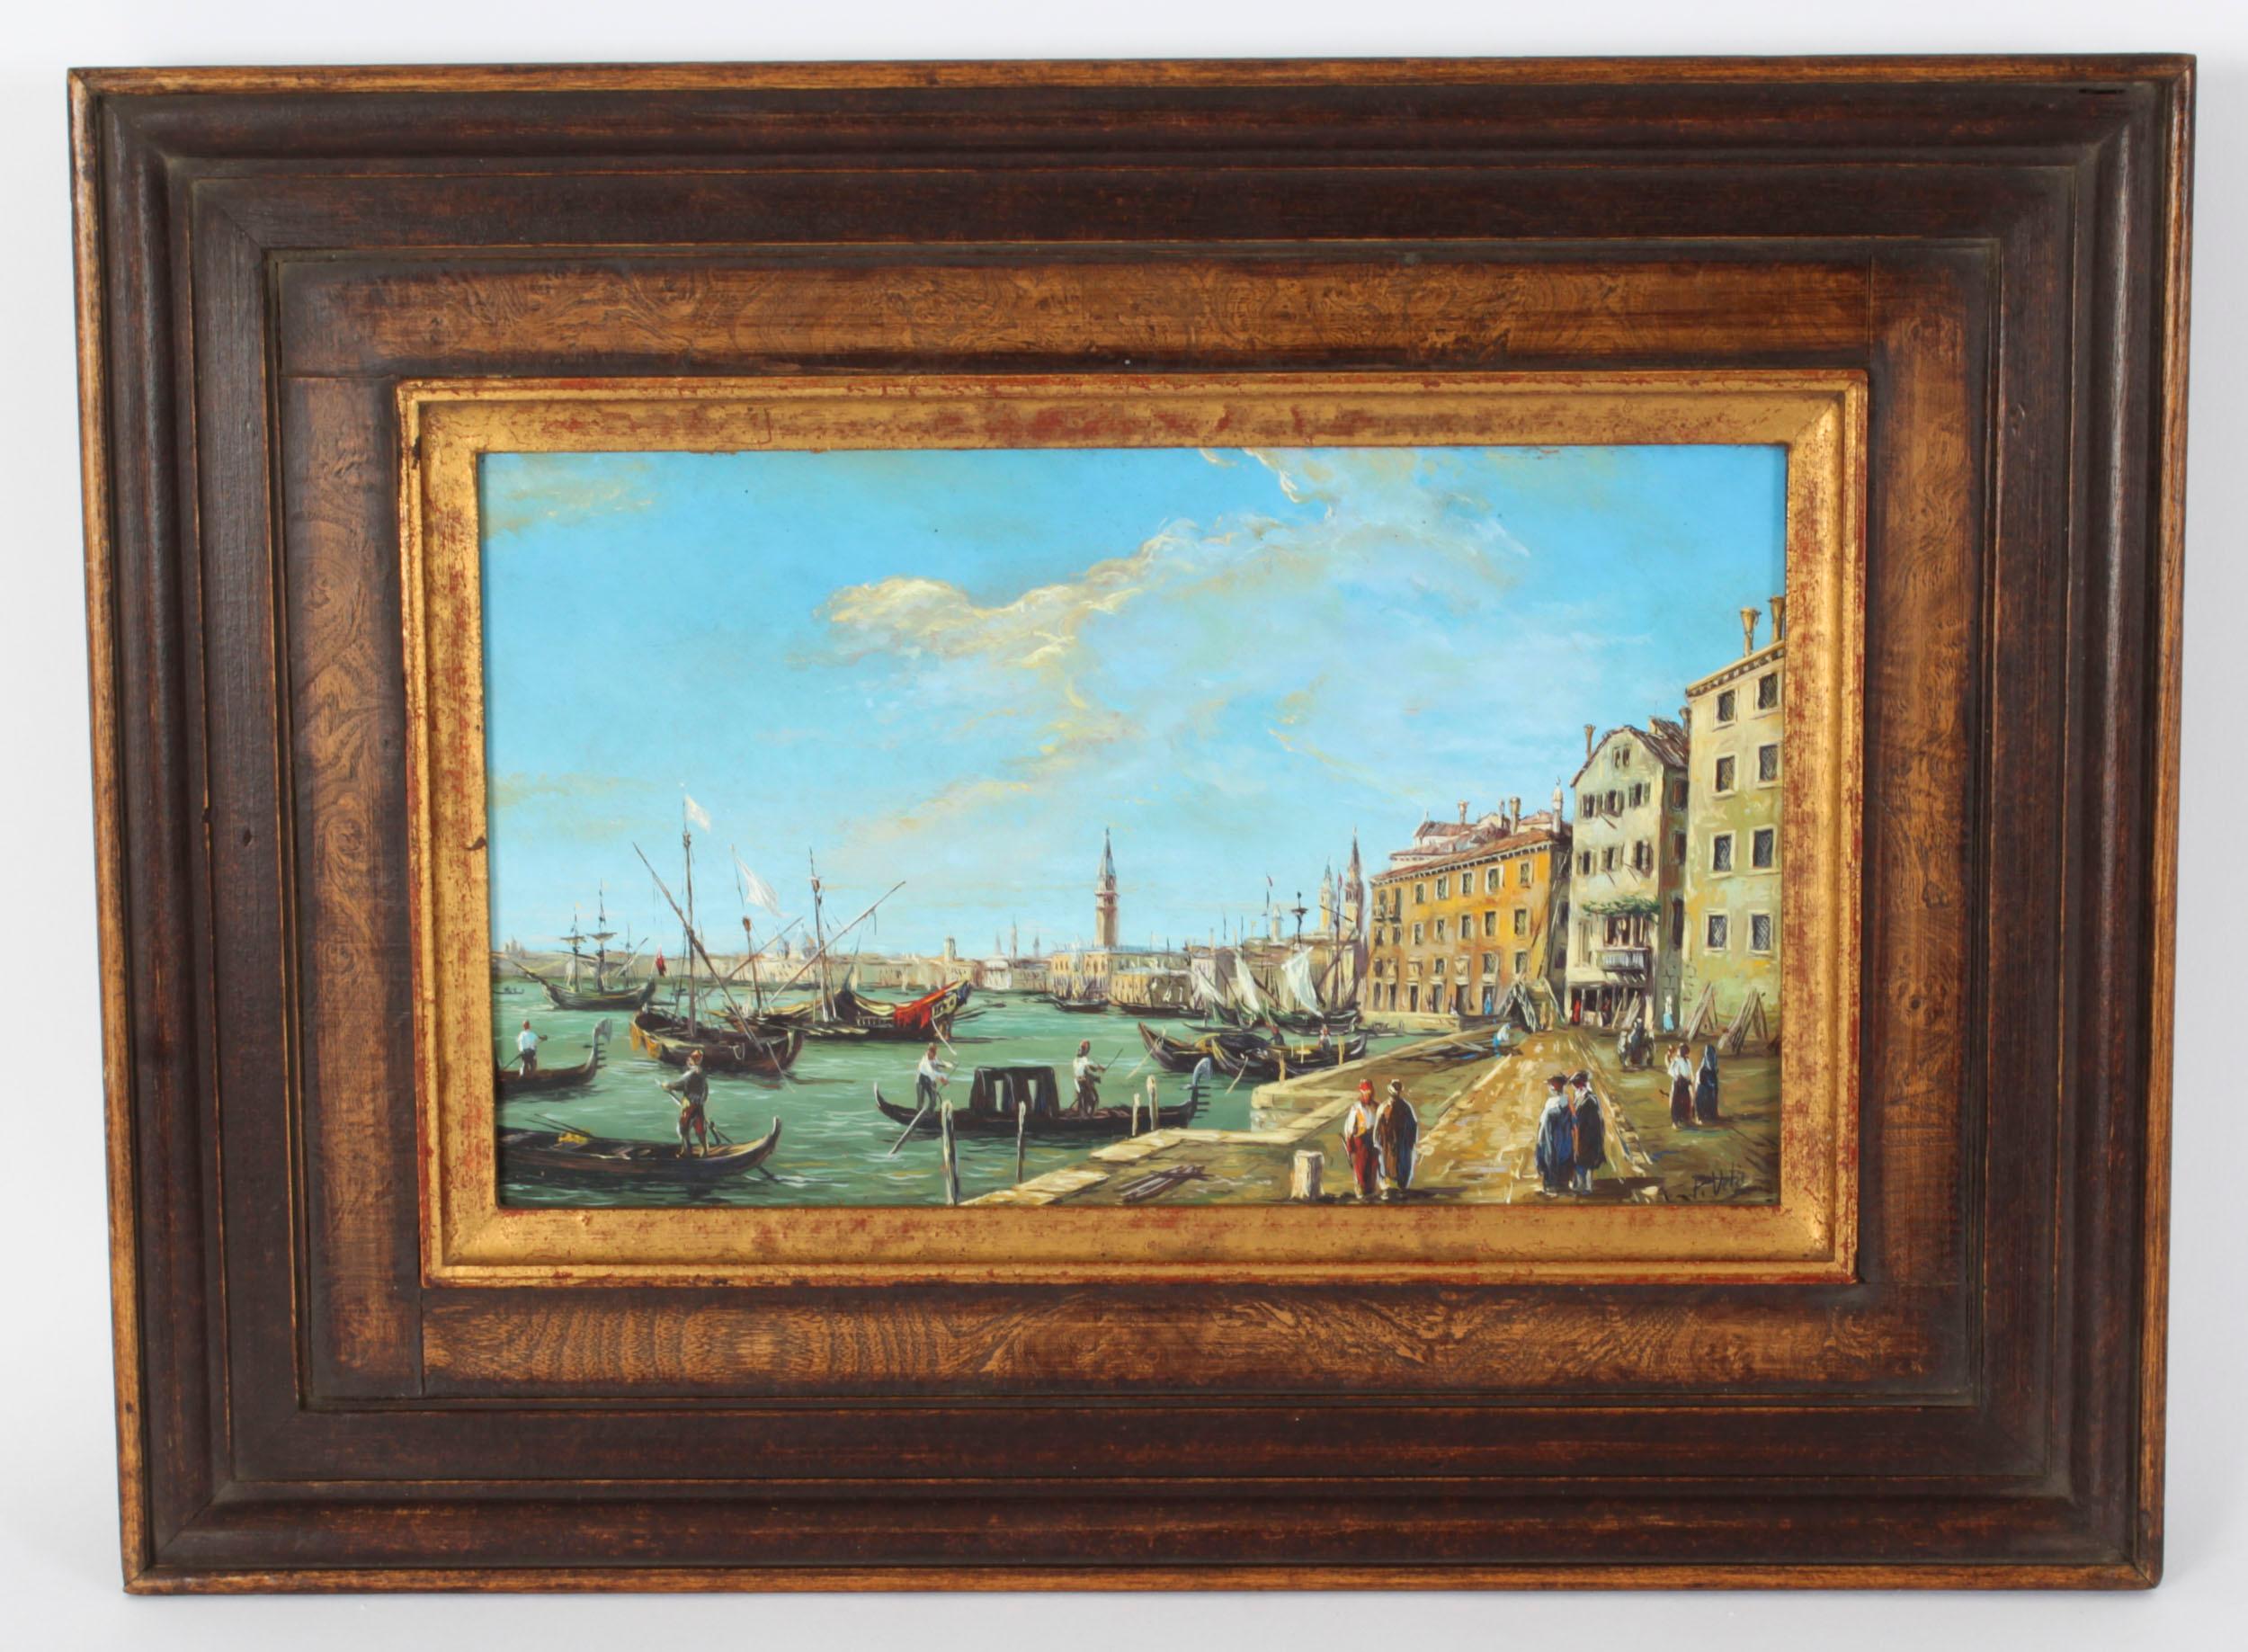 This is a beautiful pair of oil on board Continental School paintings of views of the Grand Canal in Venice, signed P. Veta, circa 1890 in date.

This beautiful pair of paintings capture striking views of the Grand Canal and both feature busy